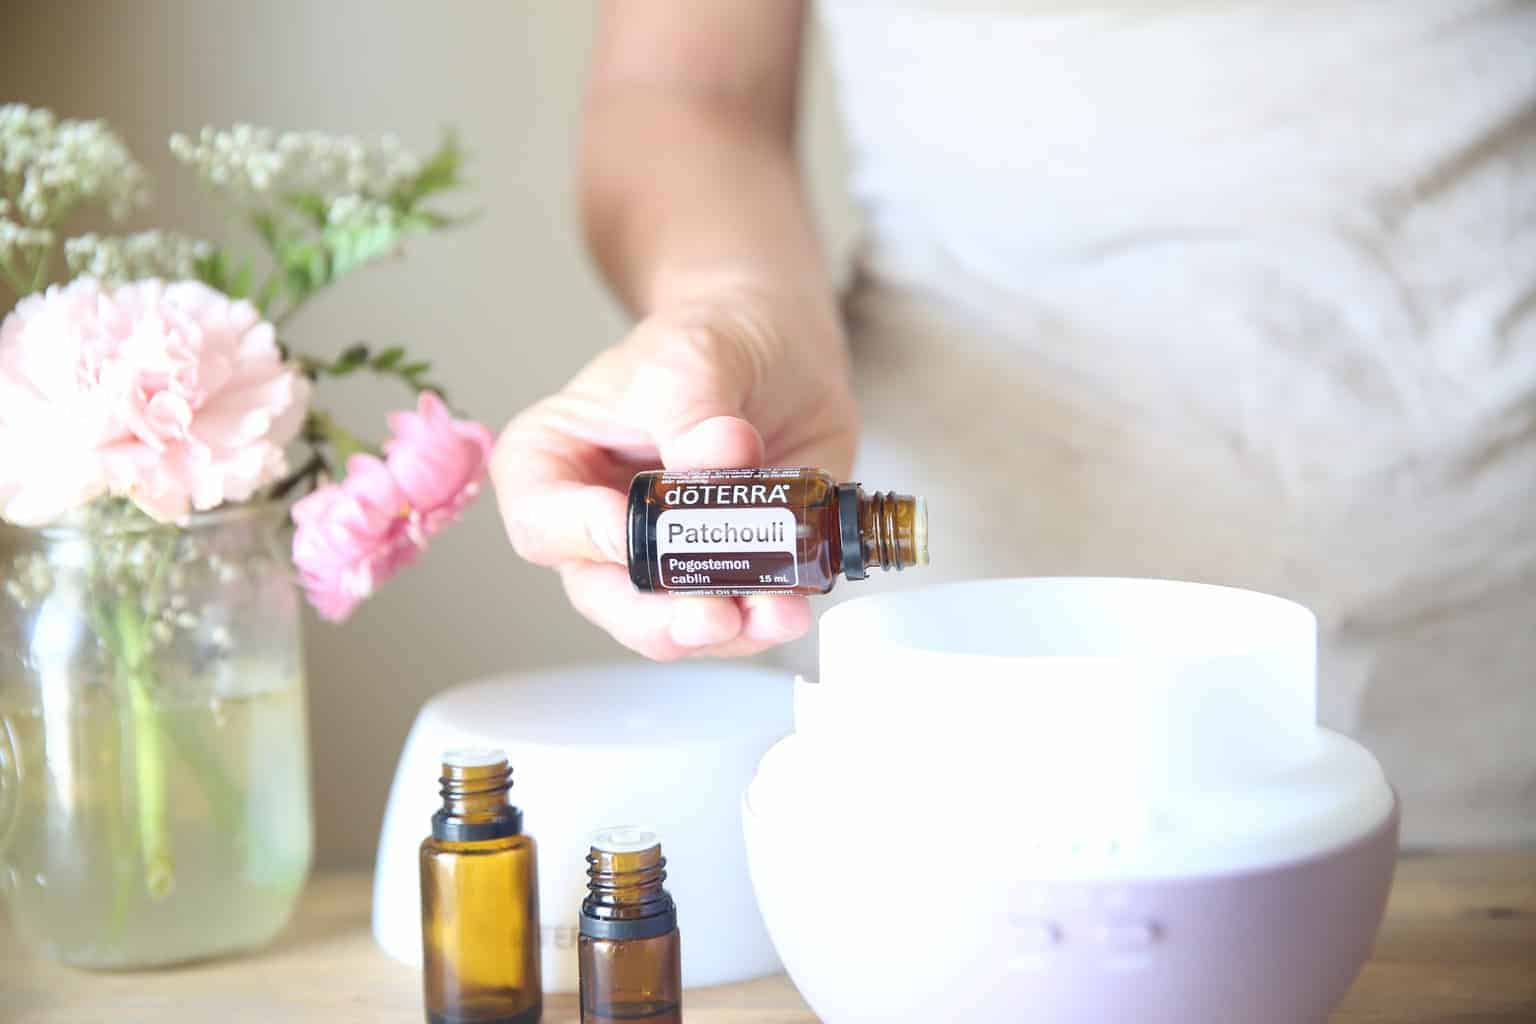 Adding patchouli essential oil to a doterra diffuser